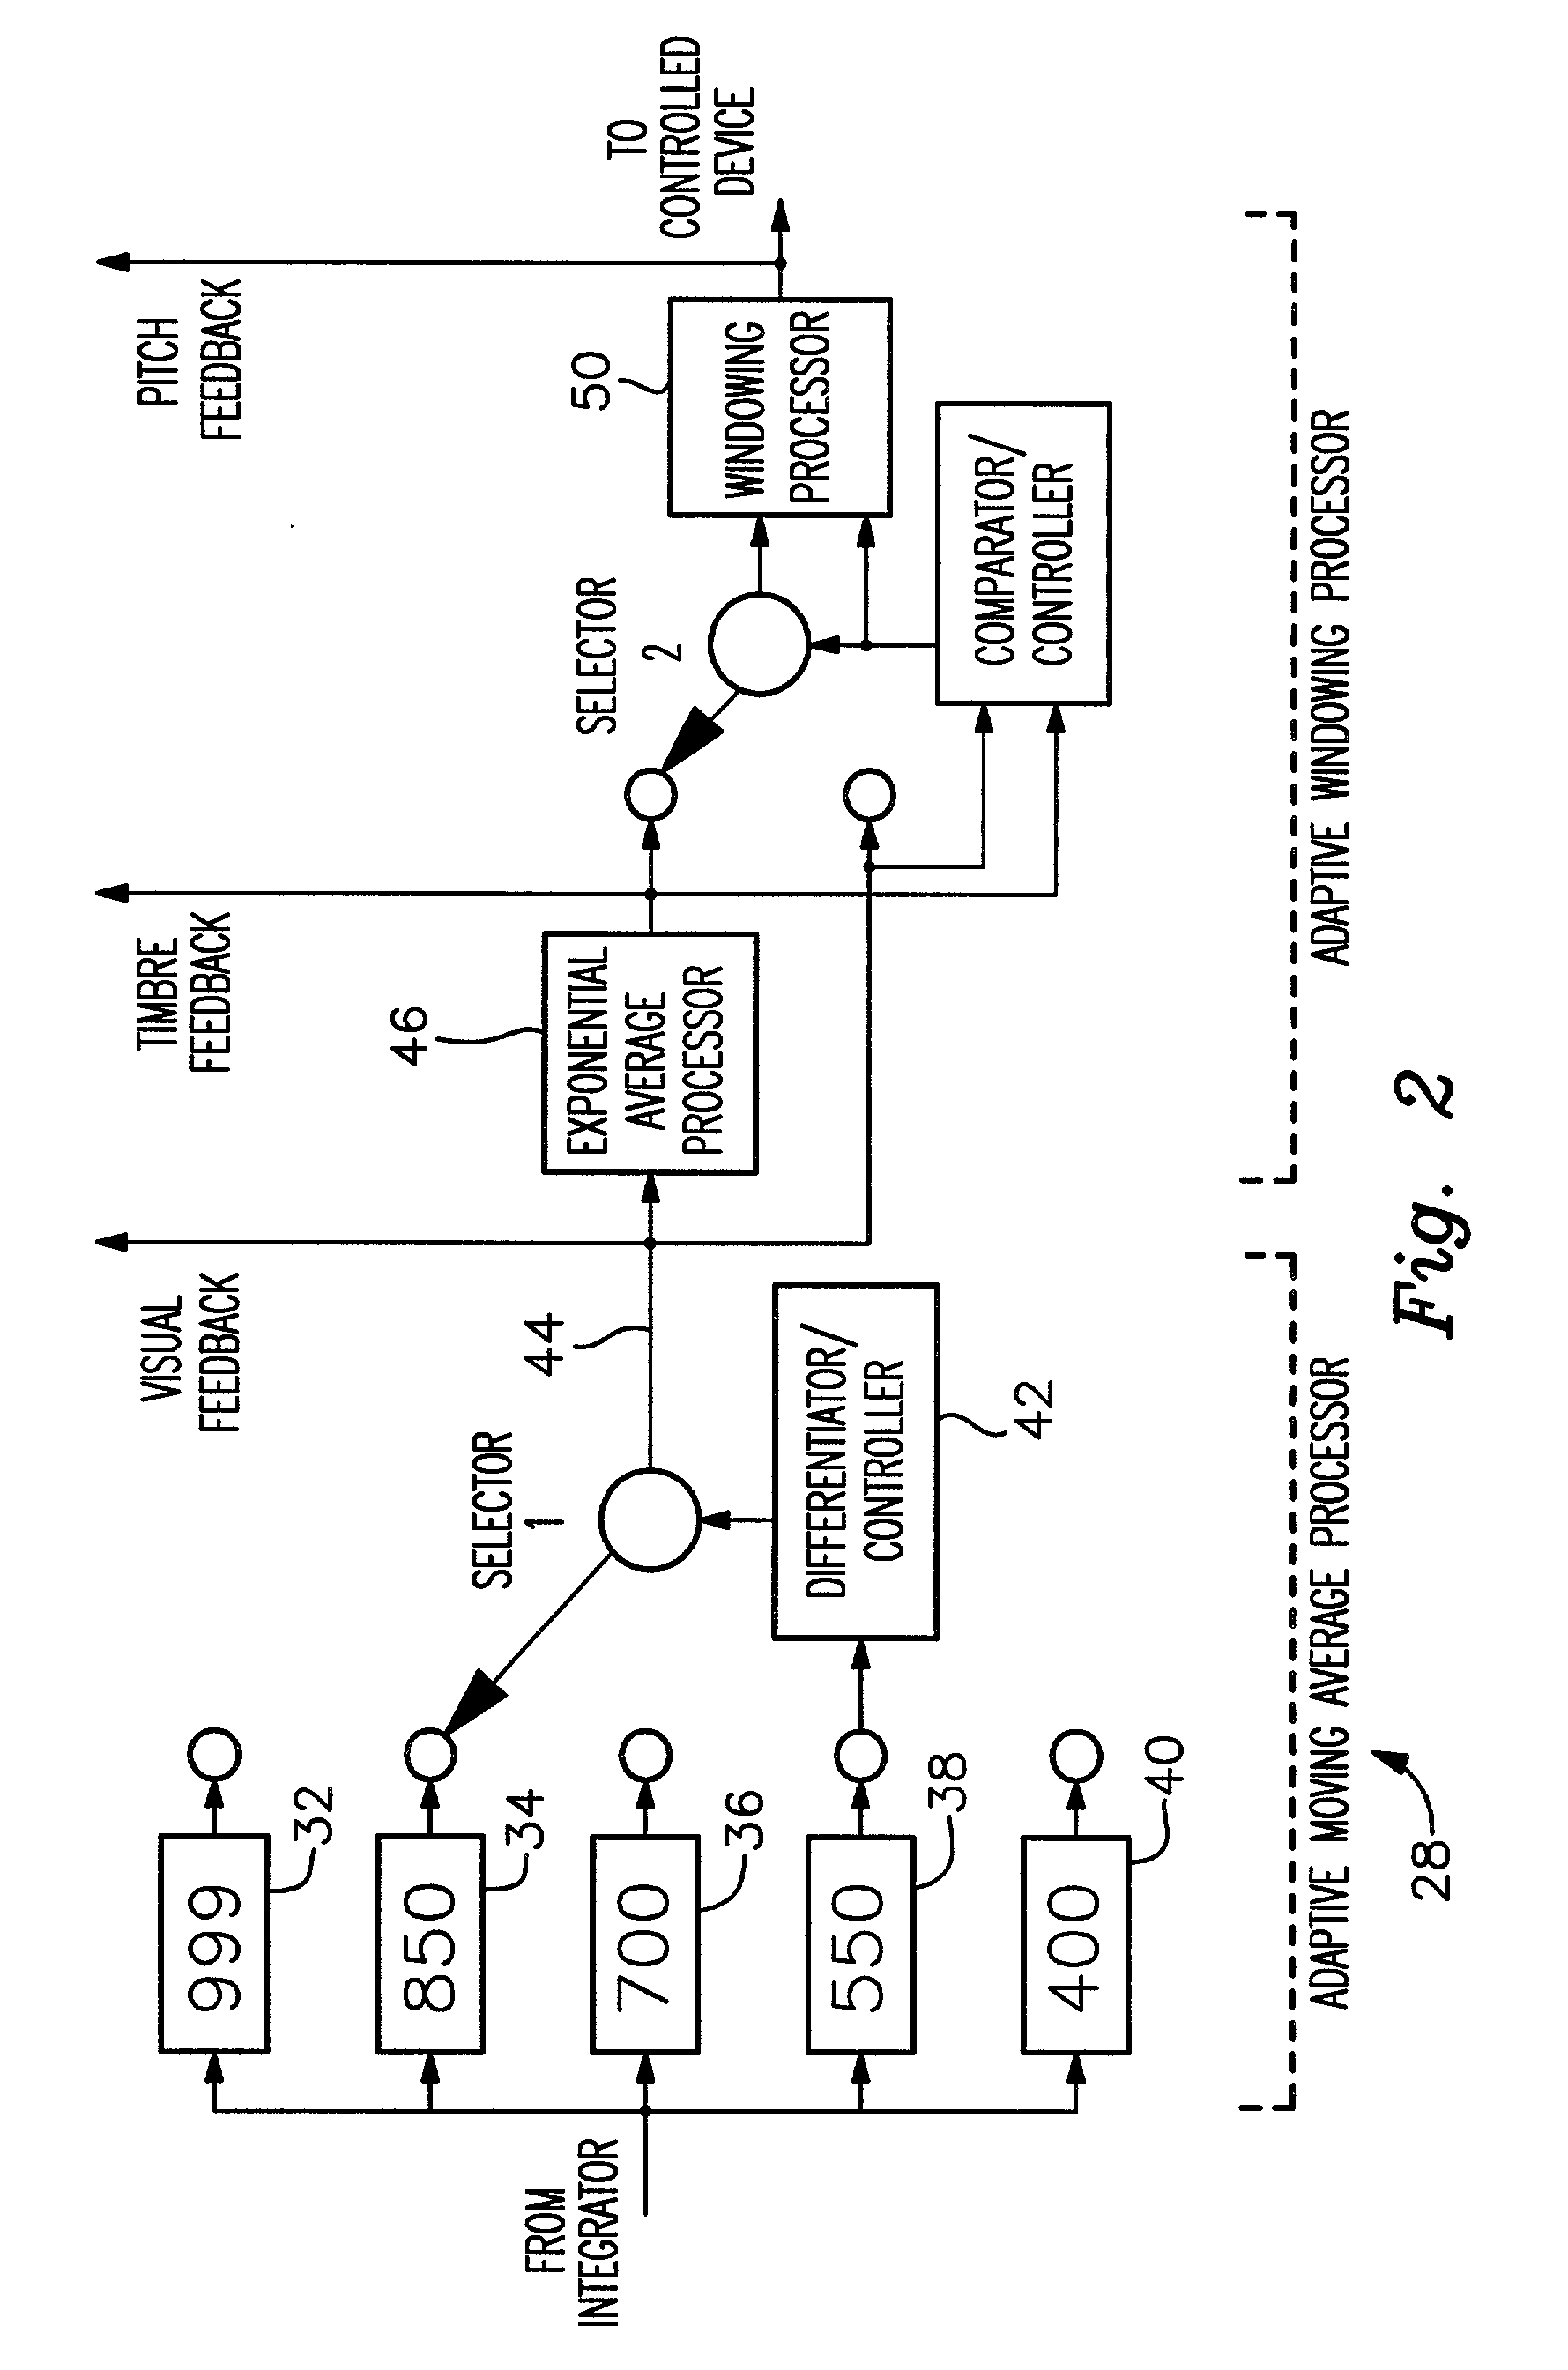 Apparatus and methods for detecting and processing EMG signals